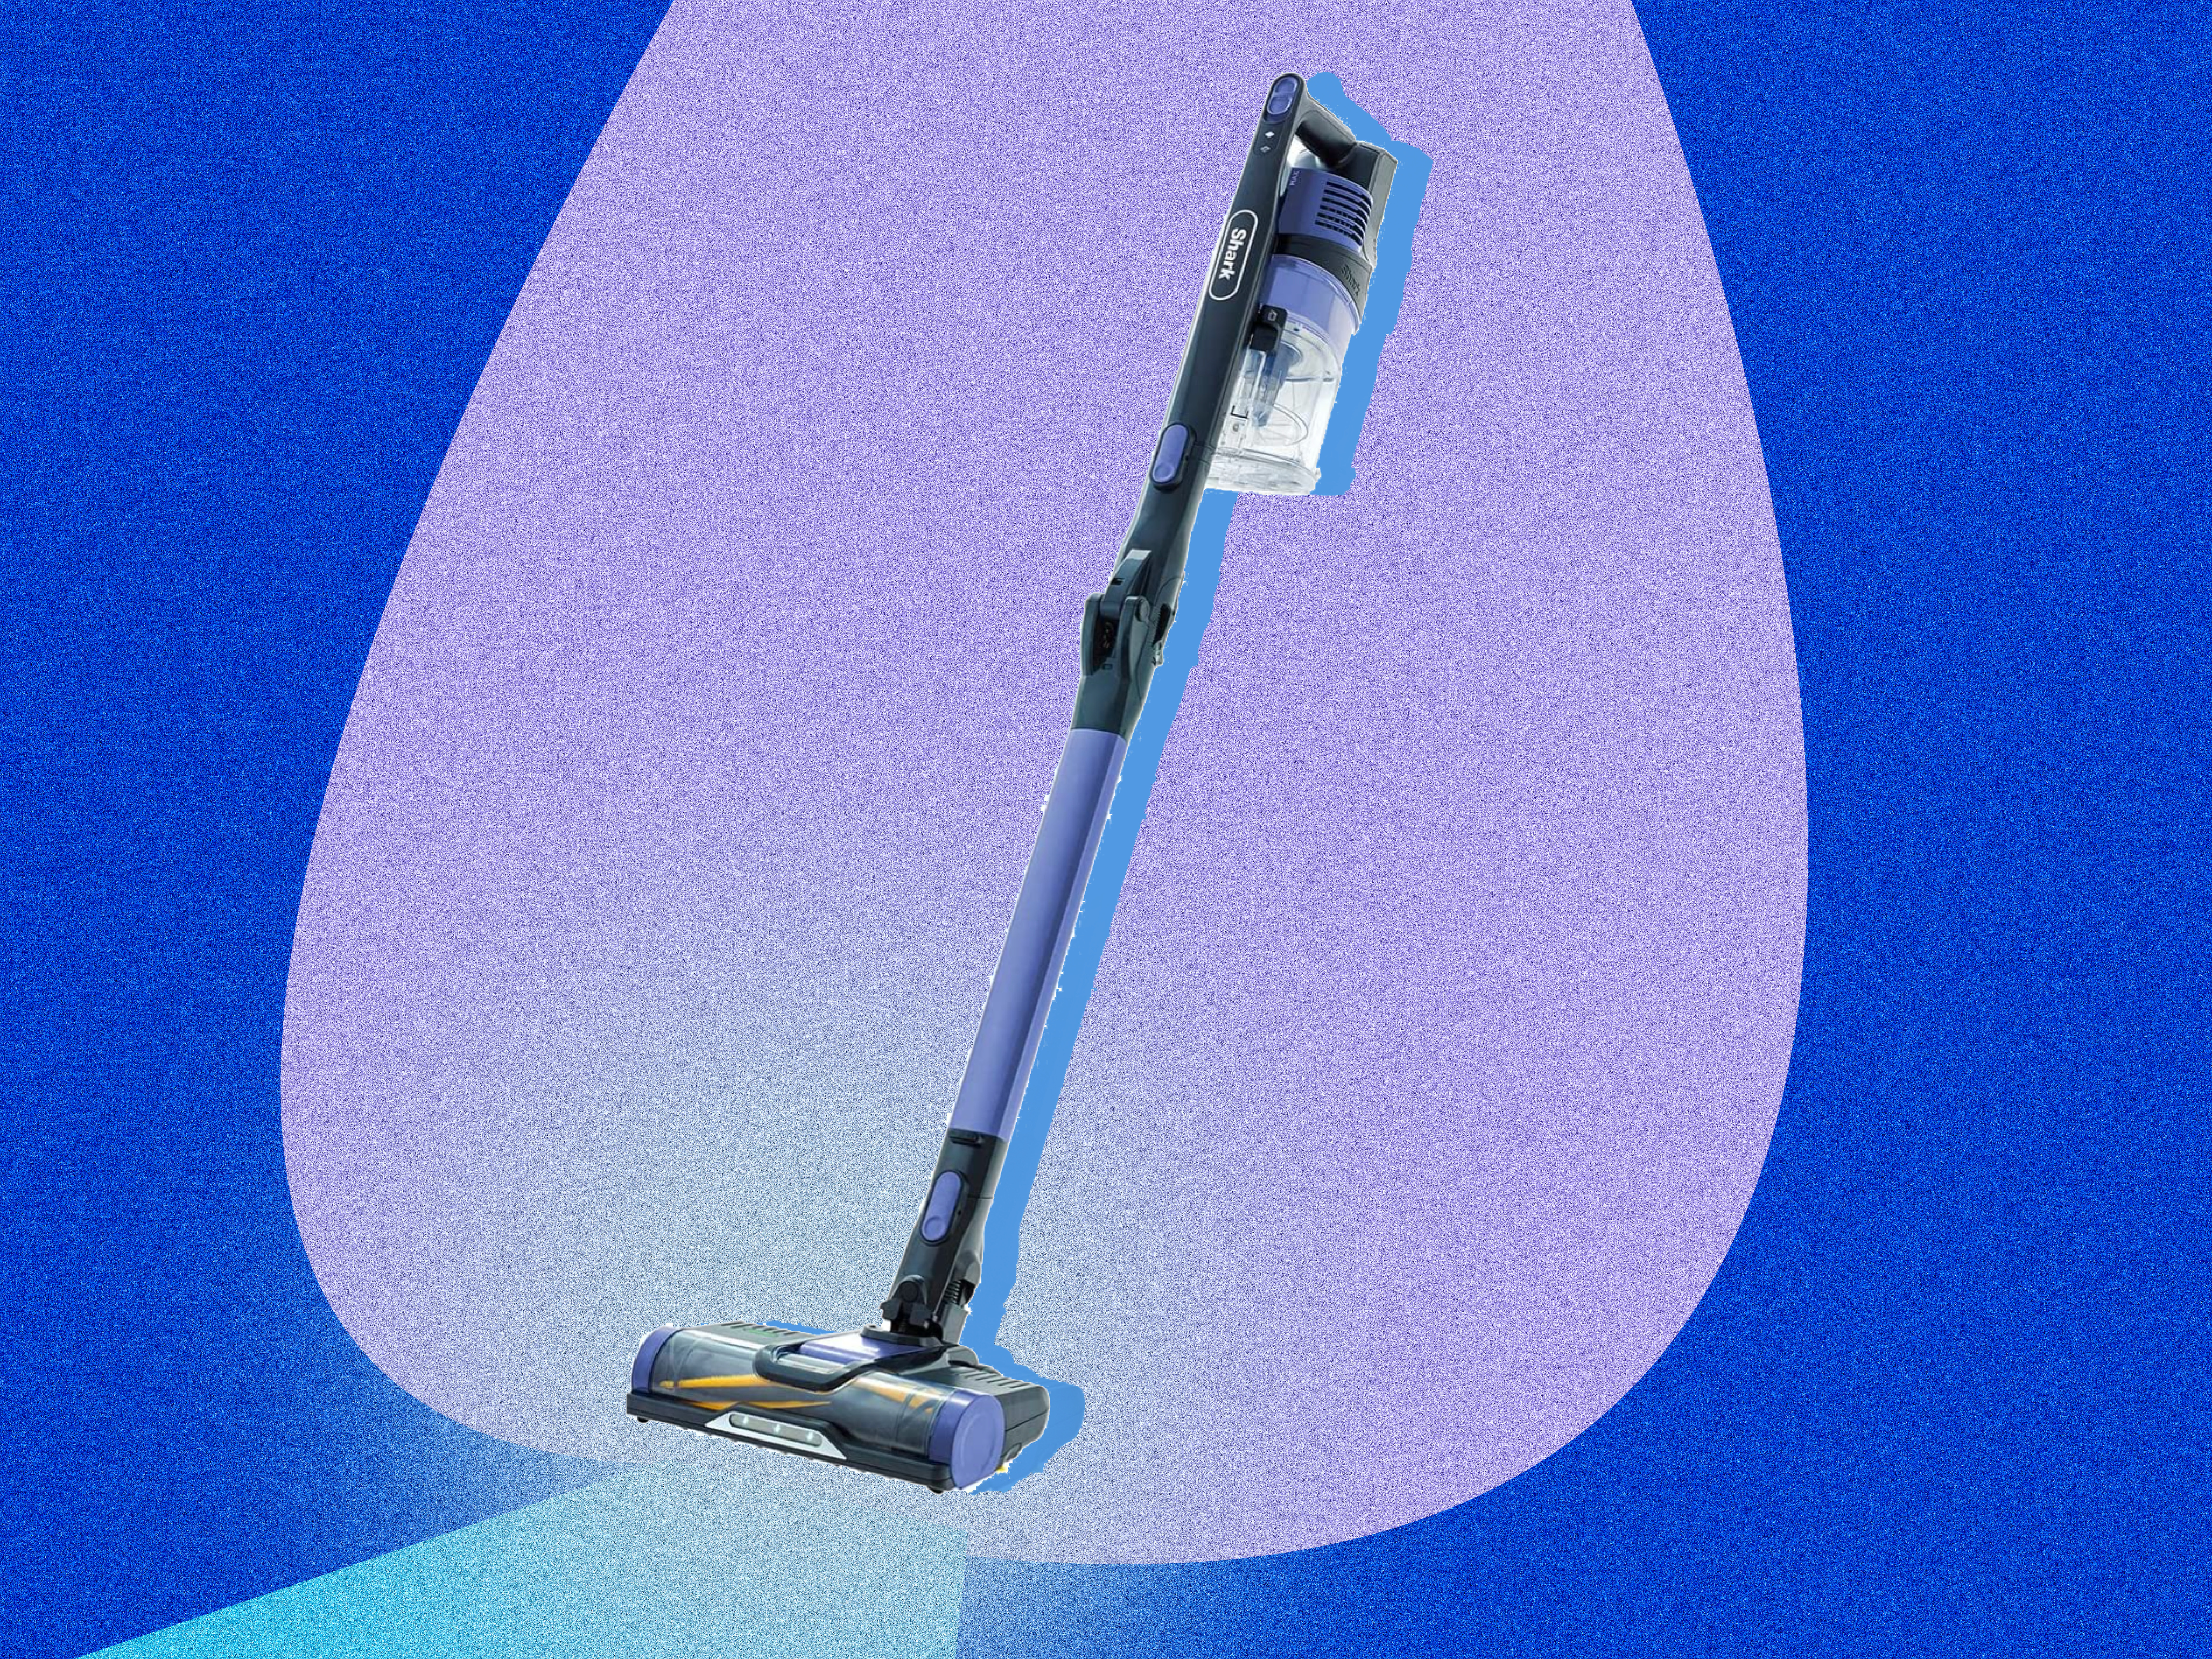 The cordless vacuum can clean for 40-minutes and transform into a hand-held